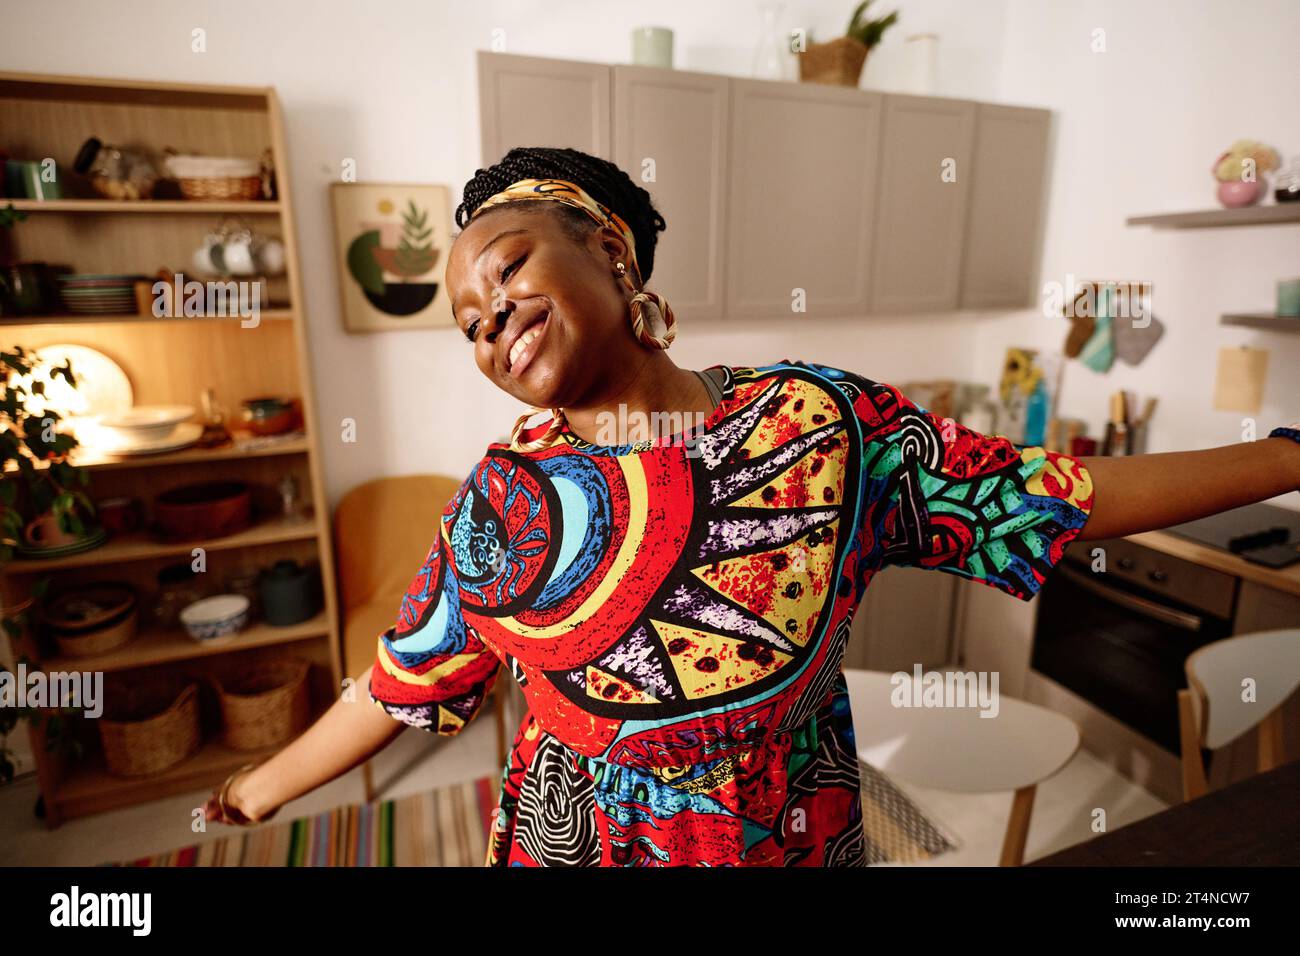 Young ecstatic woman in ethnic dress performing dance in front of camera while celebrating African American holiday in home environment Stock Photo